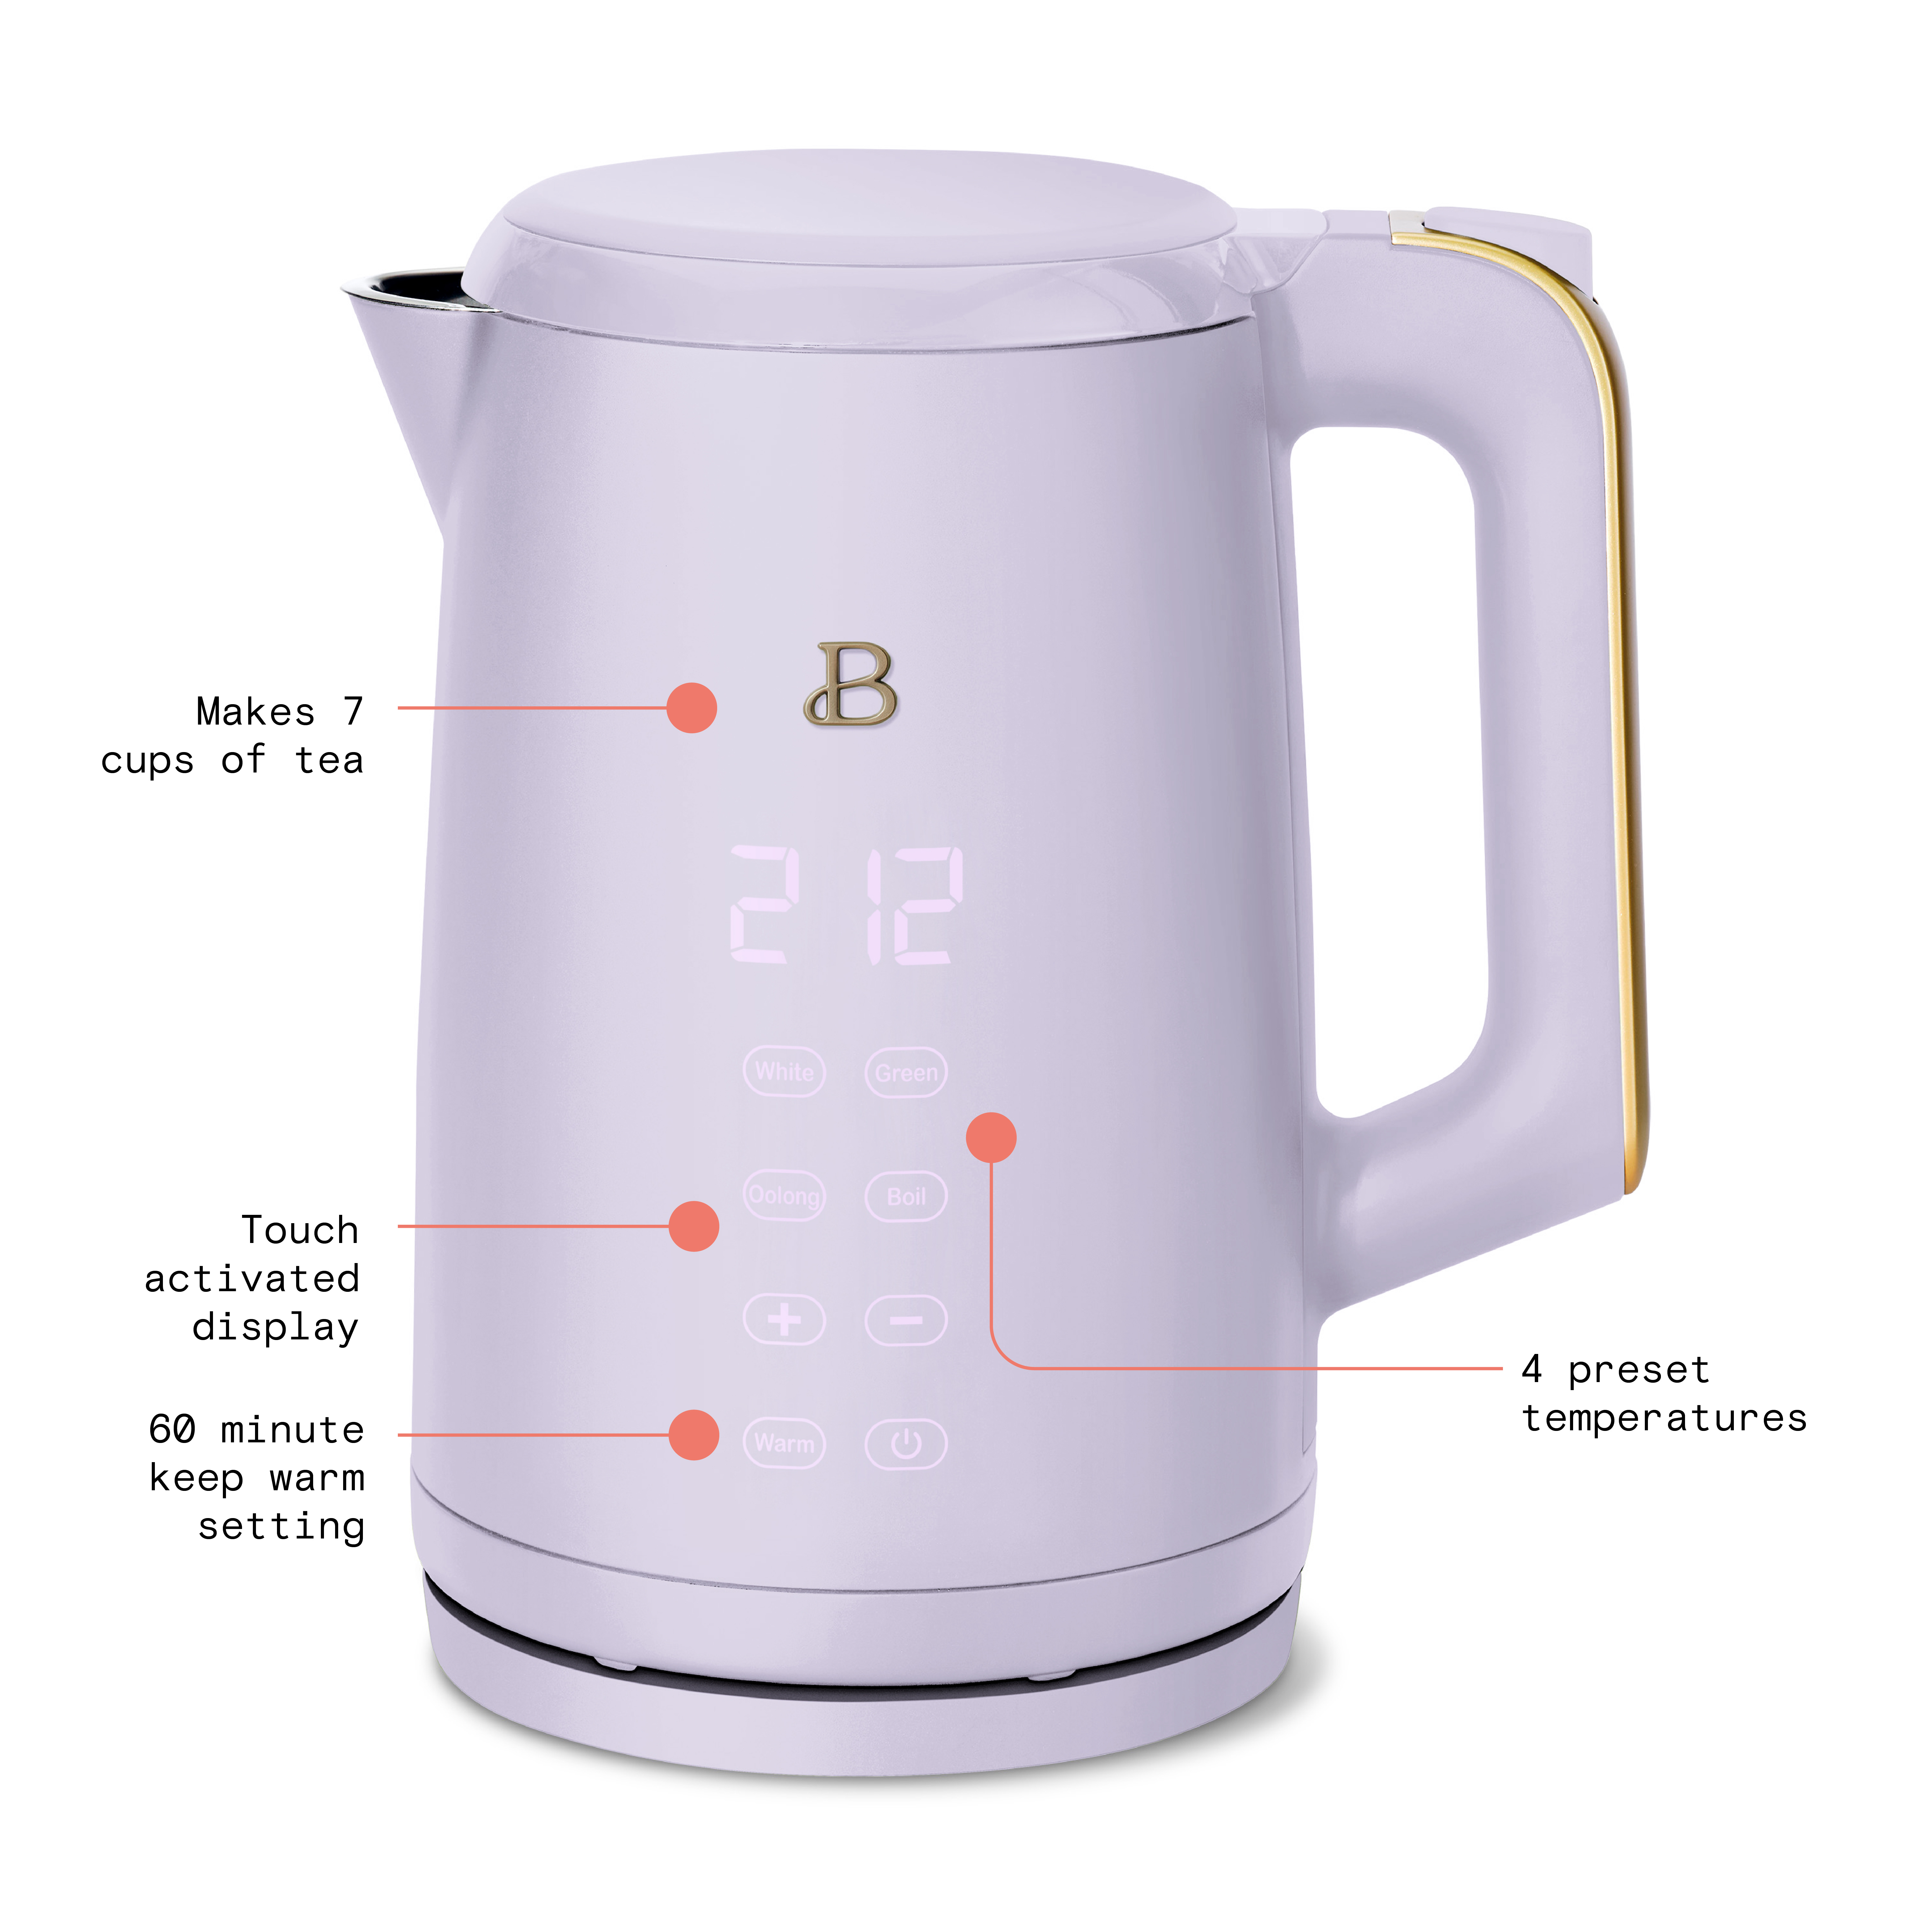 Beautiful 1.7-Liter Electric Kettle 1500 W with One-Touch Activation, Lavender by Drew Barrymore - image 3 of 6